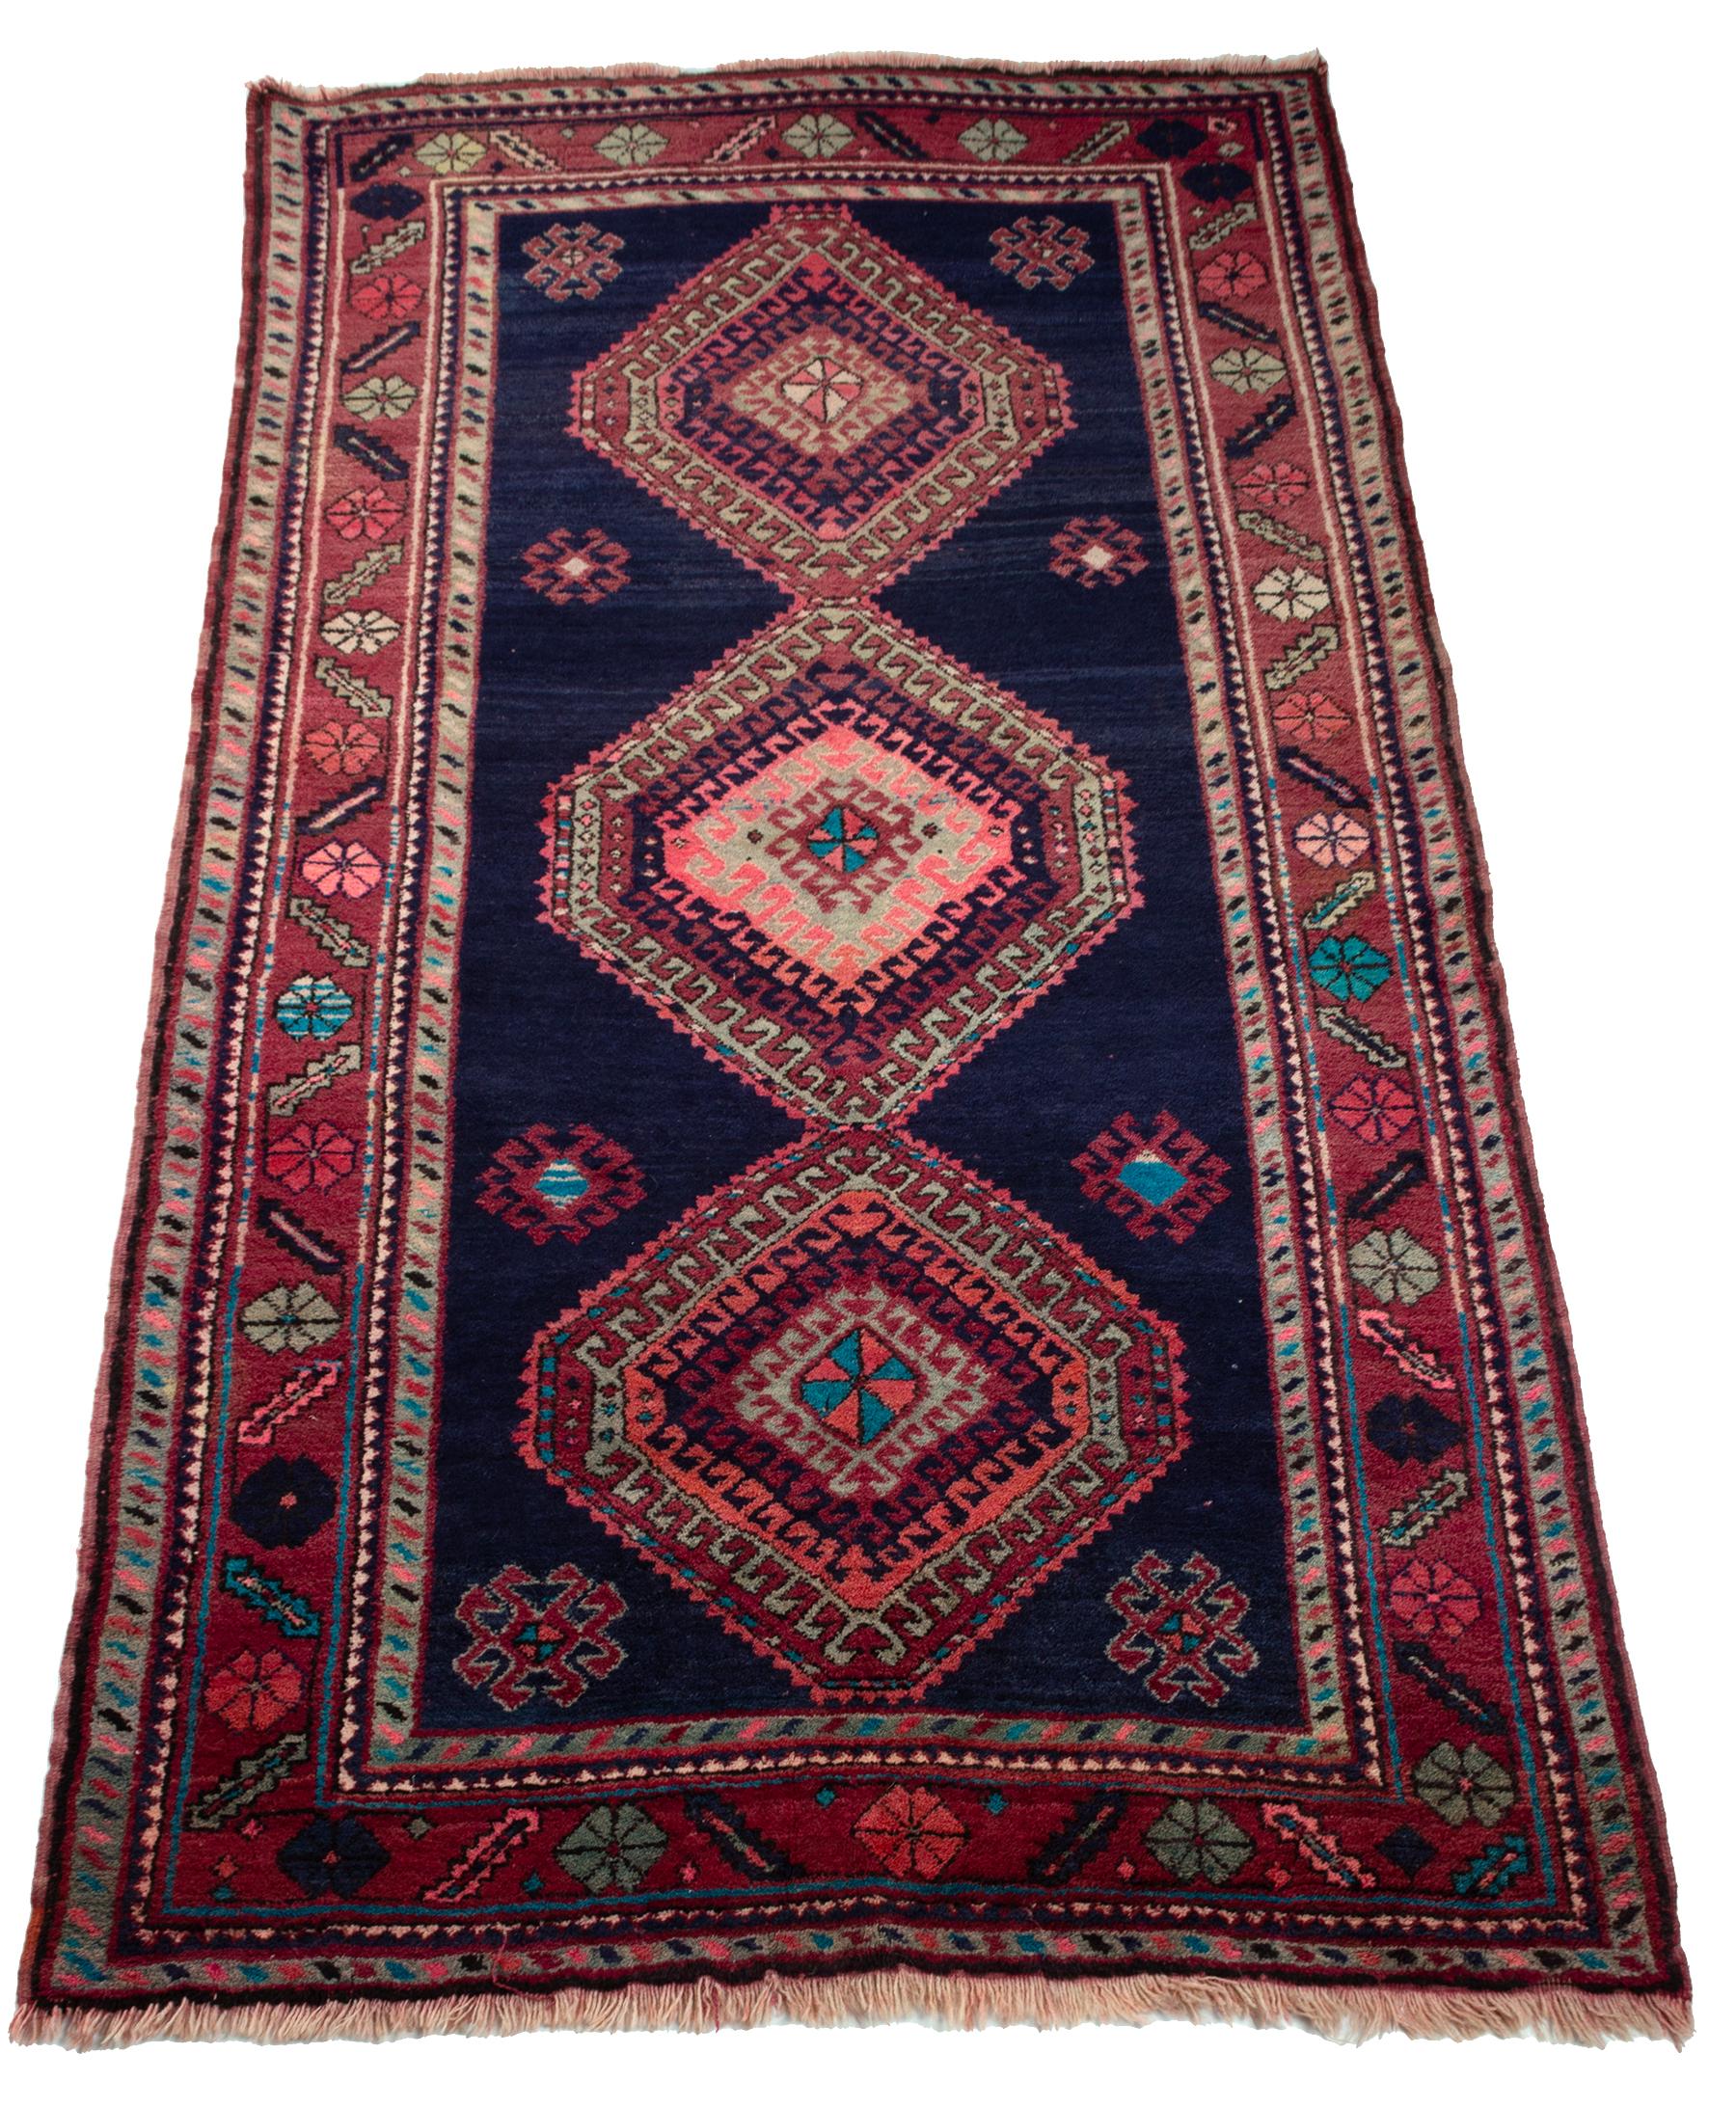 A Caucasian Kazak rug

A Caucasian Kazak rug,
decorated with three central medallions to a navy field, and red borders,

Measures: 261cm x 148cm

In good condition commensurate with age.